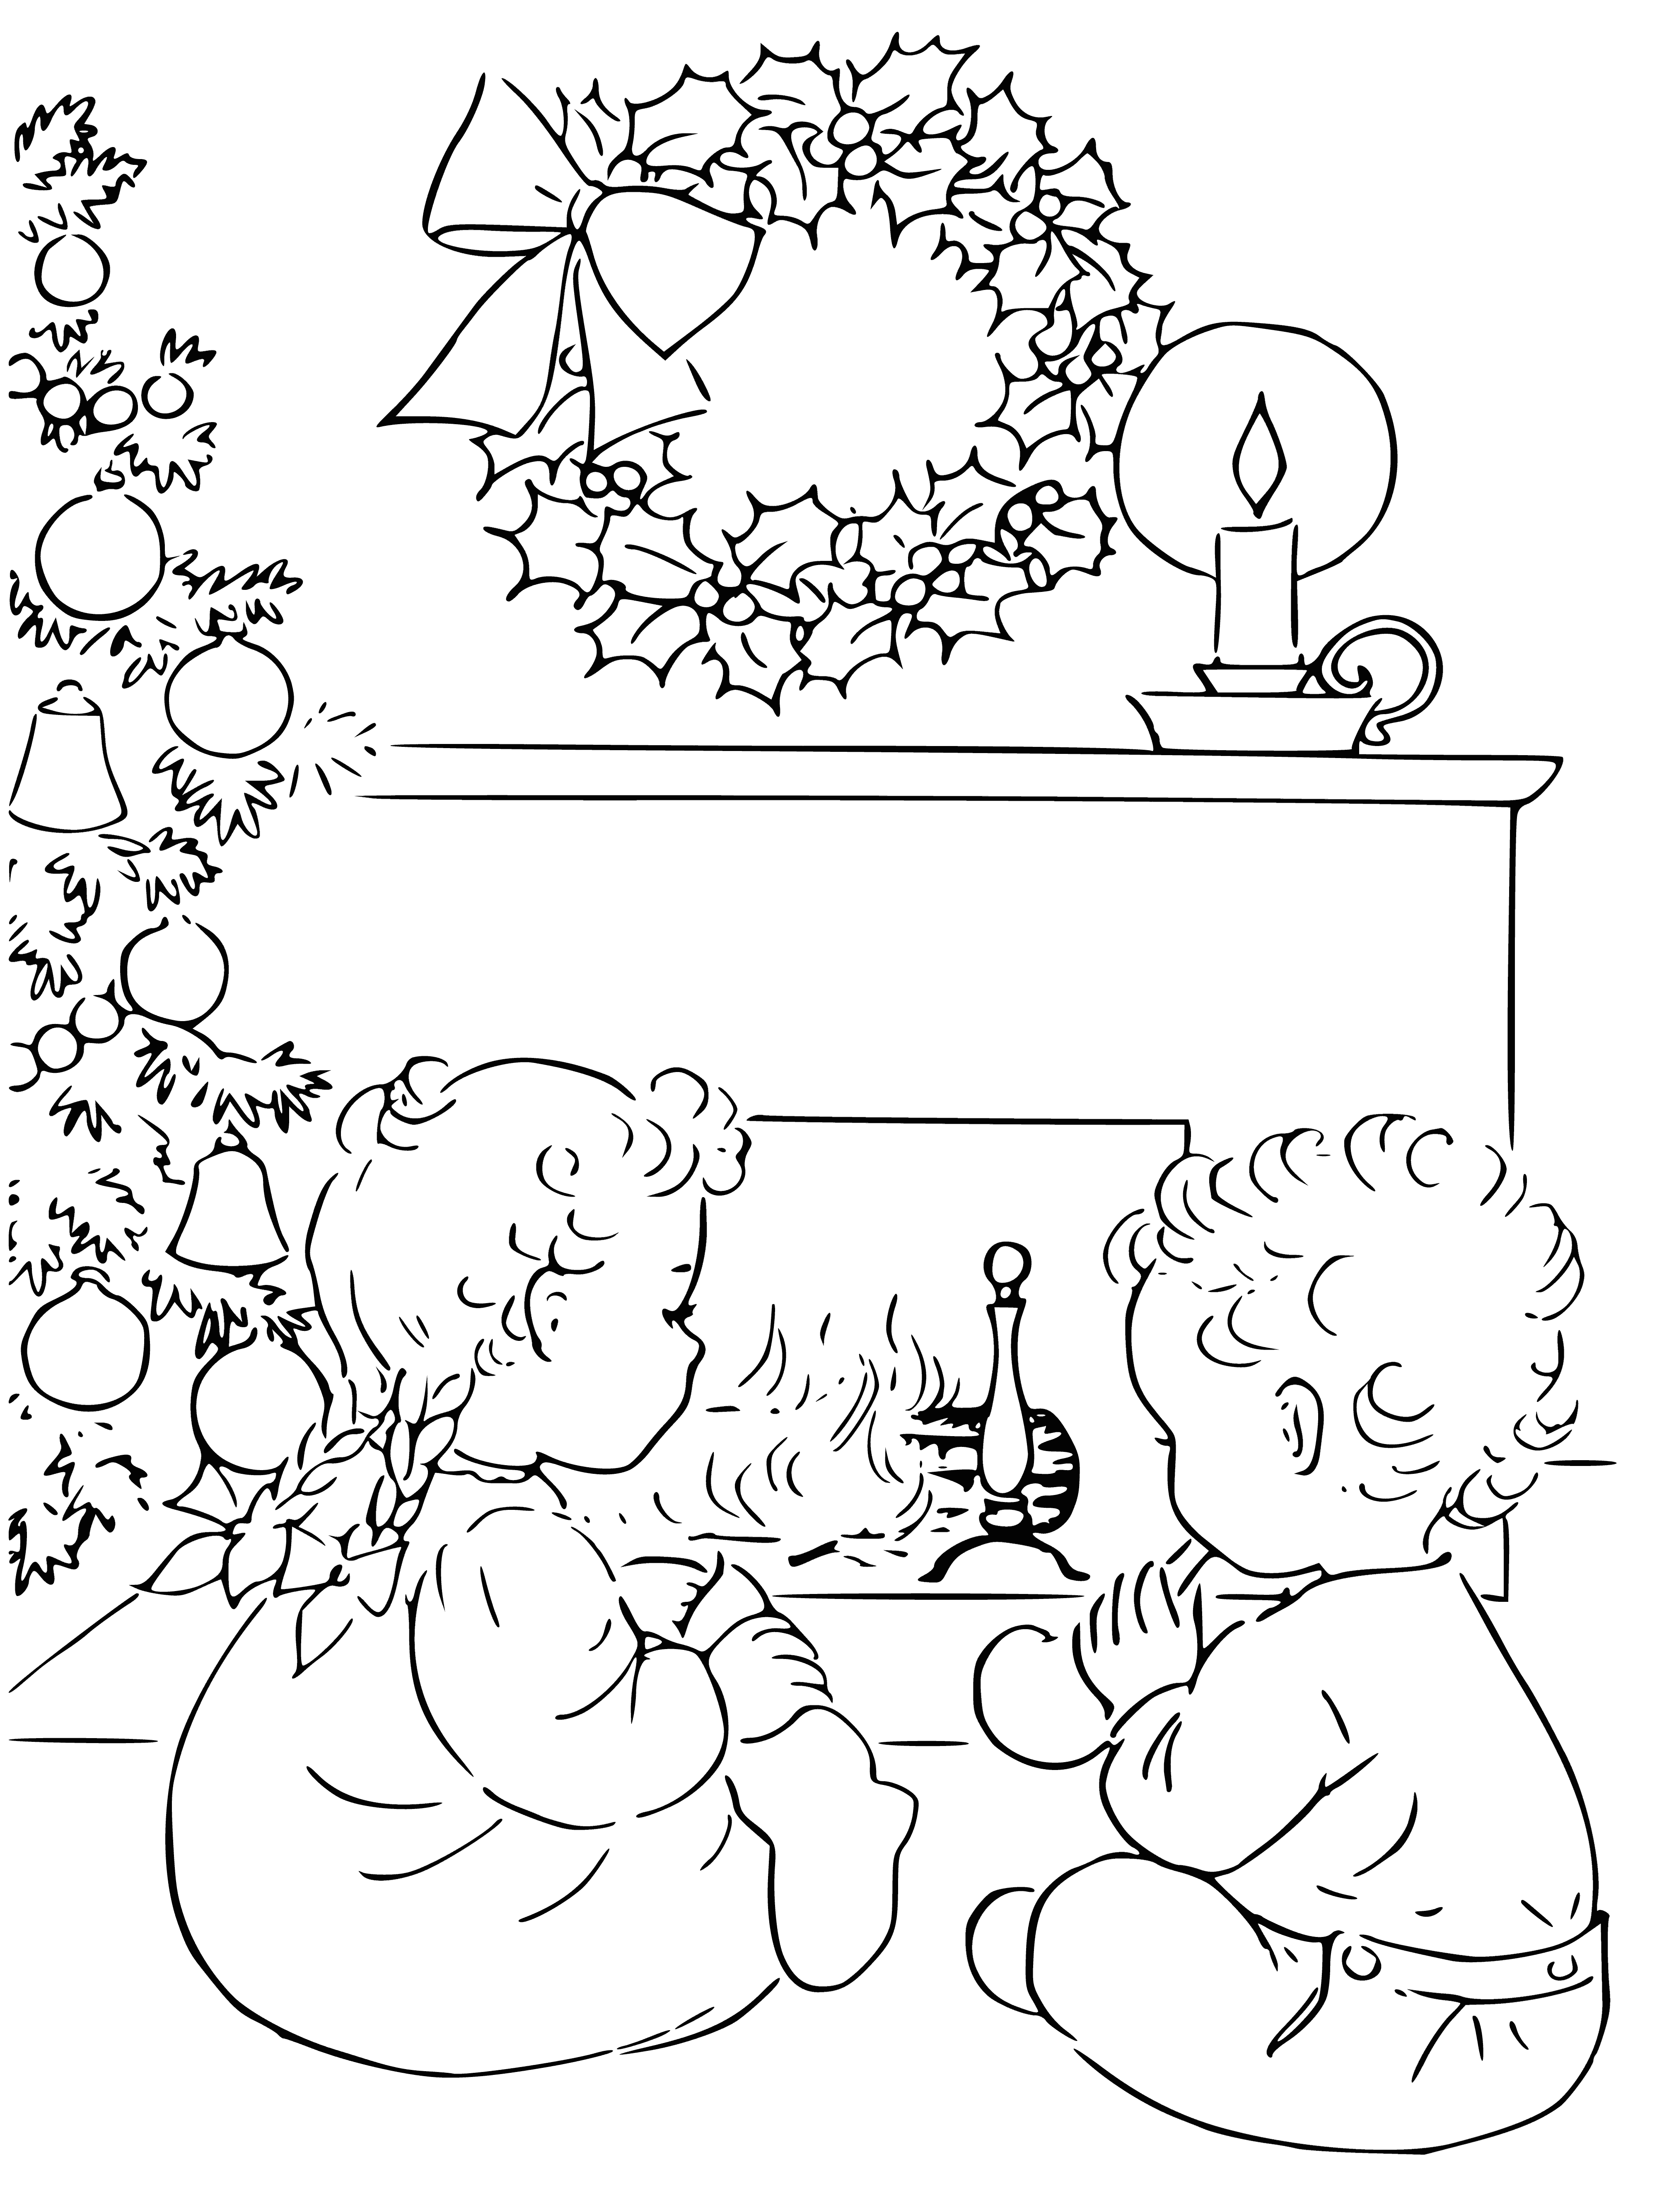 coloring page: Four blonde girls huddle before a fireplace - youngest girl on lap of one, two girls in middle looking at third girl looking at camera.